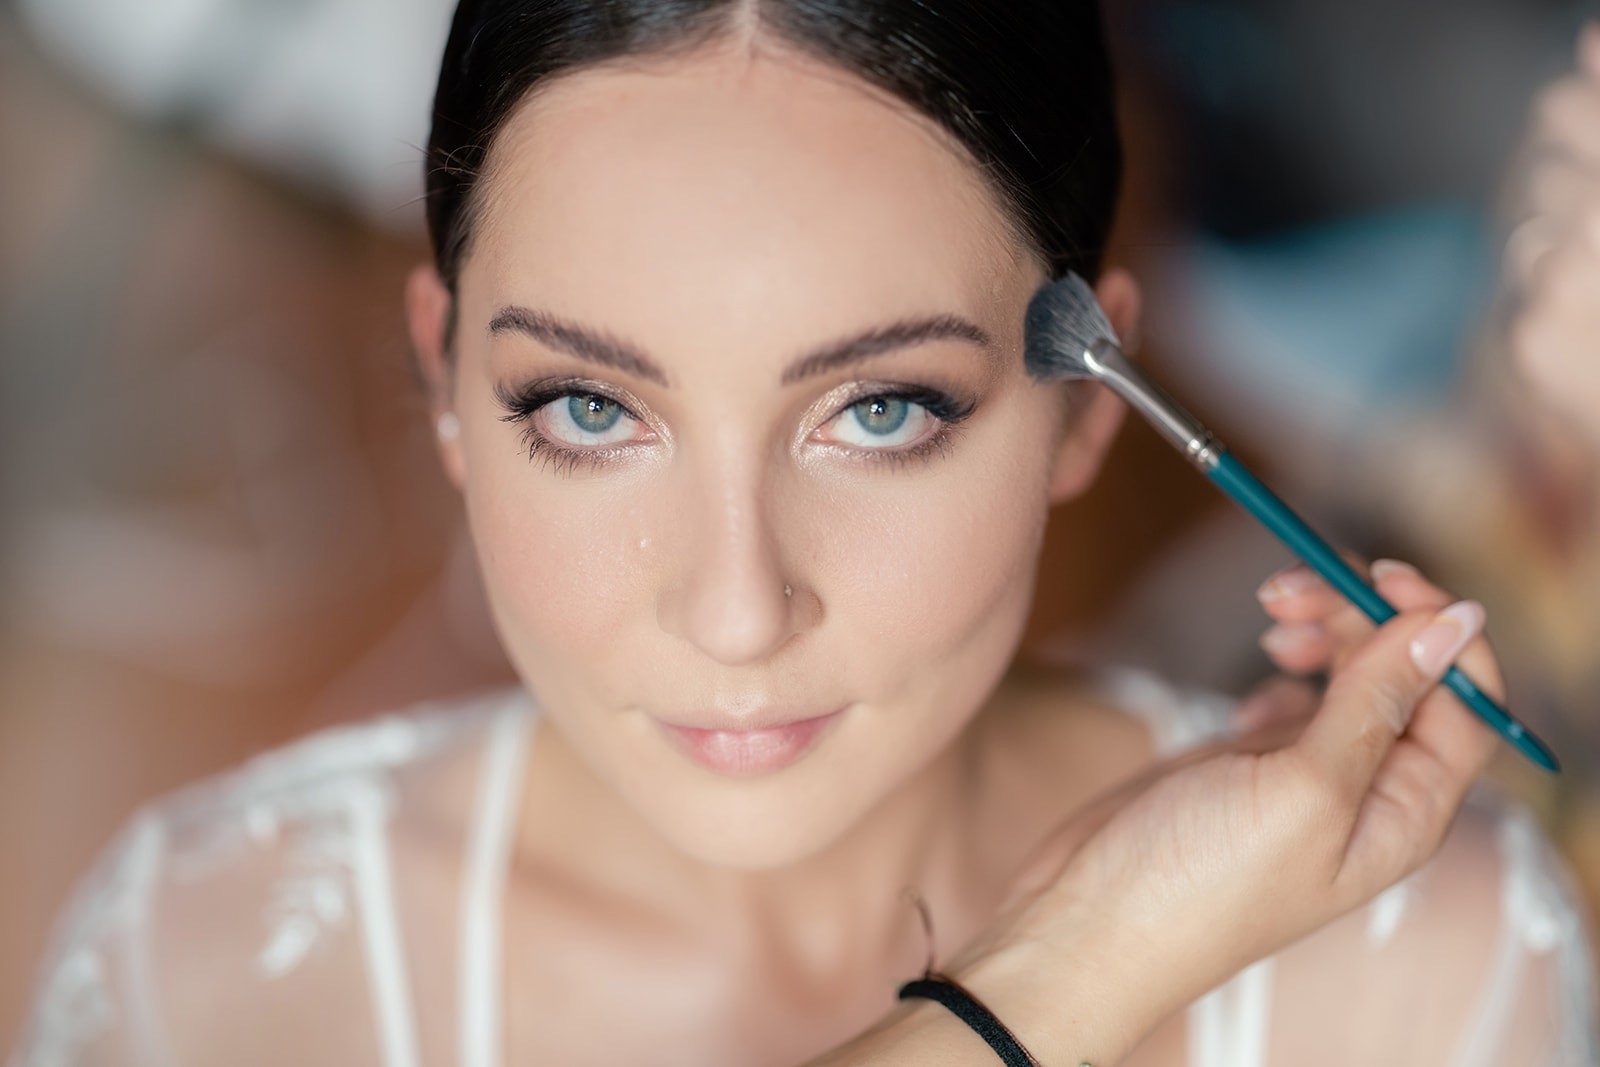 Top tips for getting ready on the morning of your wedding